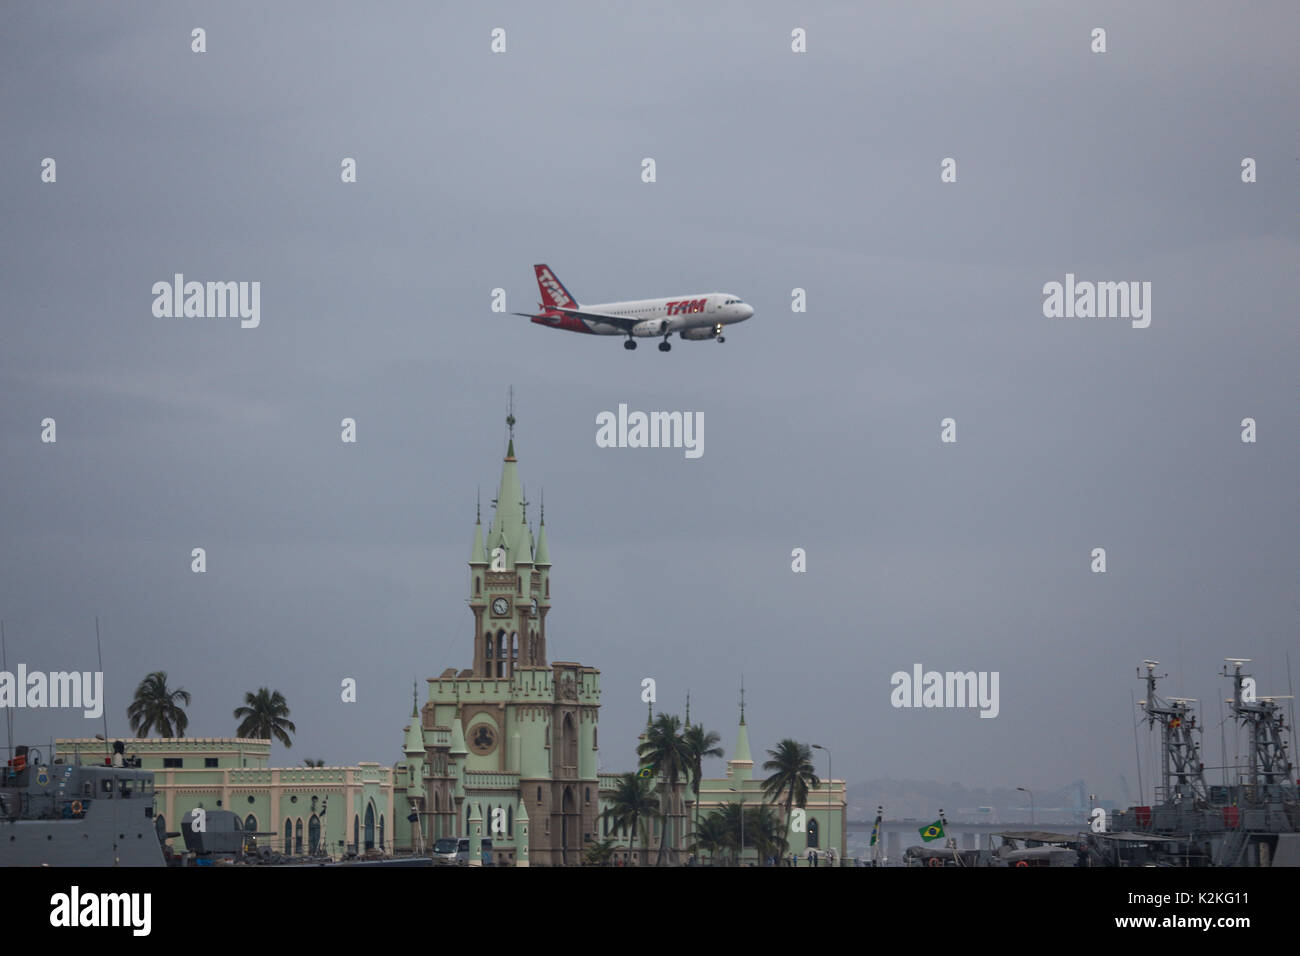 Rio de Janeiro, Brazil, August 31, 2017: End of August is marked by falling temperatures in the city of Rio de Janeiro. The thermometers marked below 20 degrees celsius. In this image Latam plane flies over the Fiscal Island, historic building in the Guanabara Bay, in downtown Rio. Credit: Luiz Souza/Alamy Live News Stock Photo